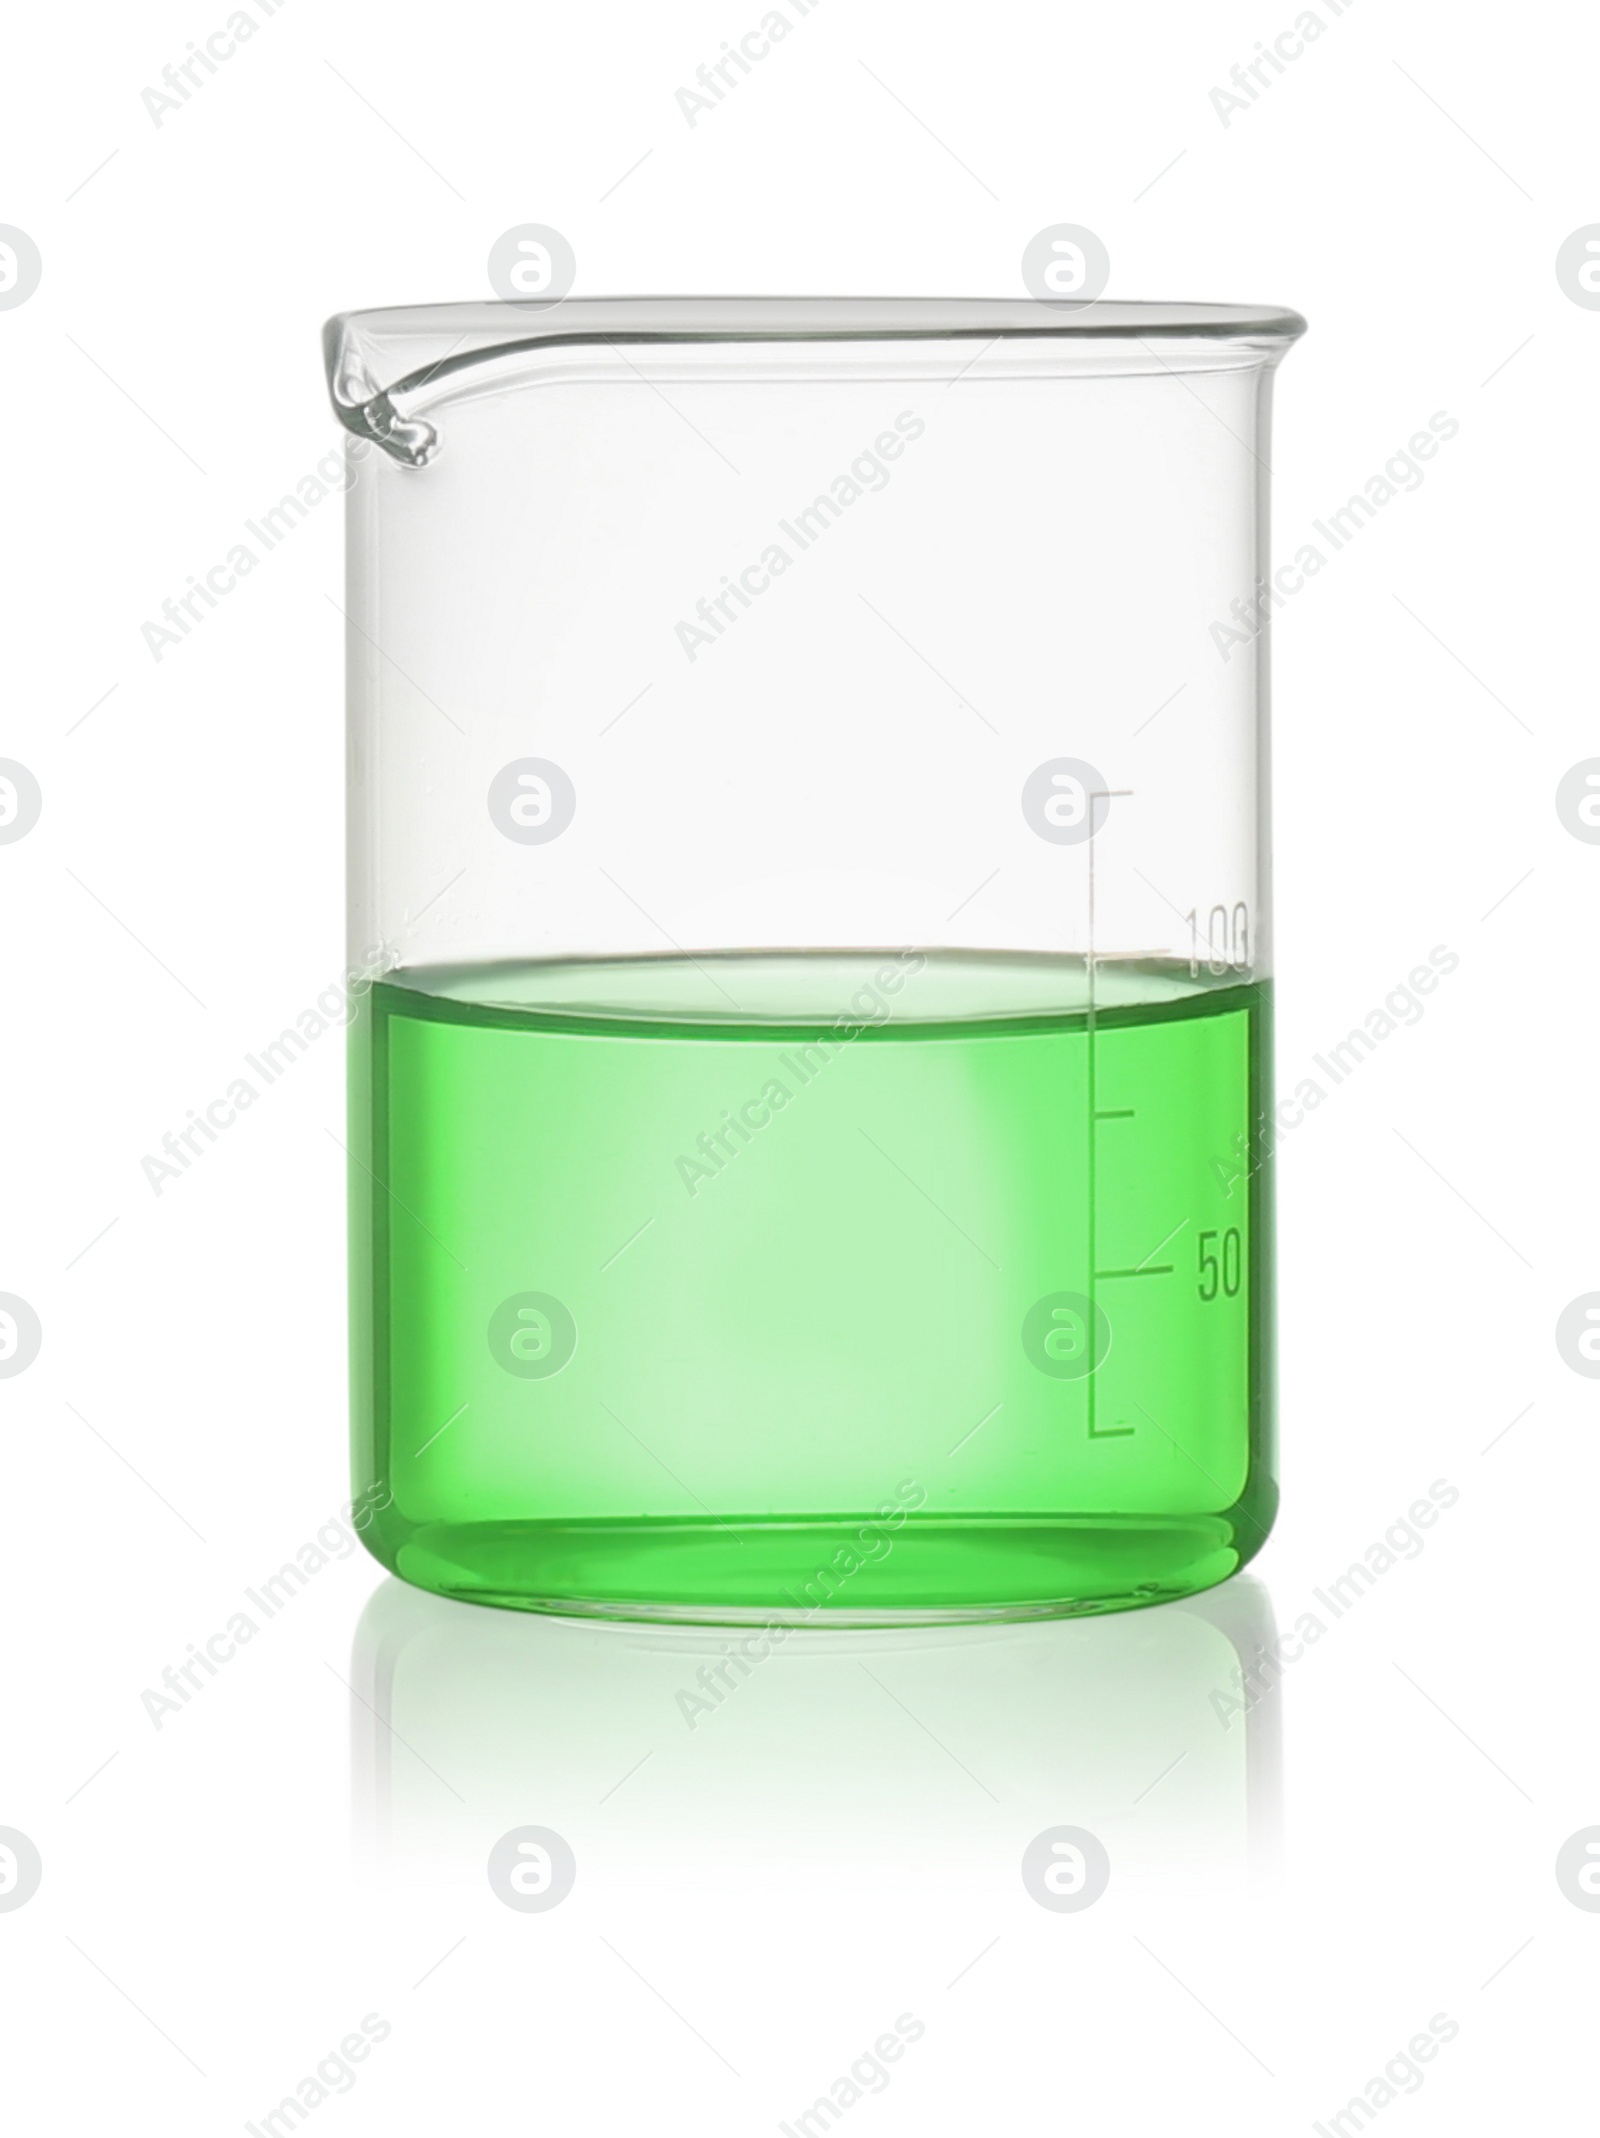 Photo of Beaker with light green liquid isolated on white